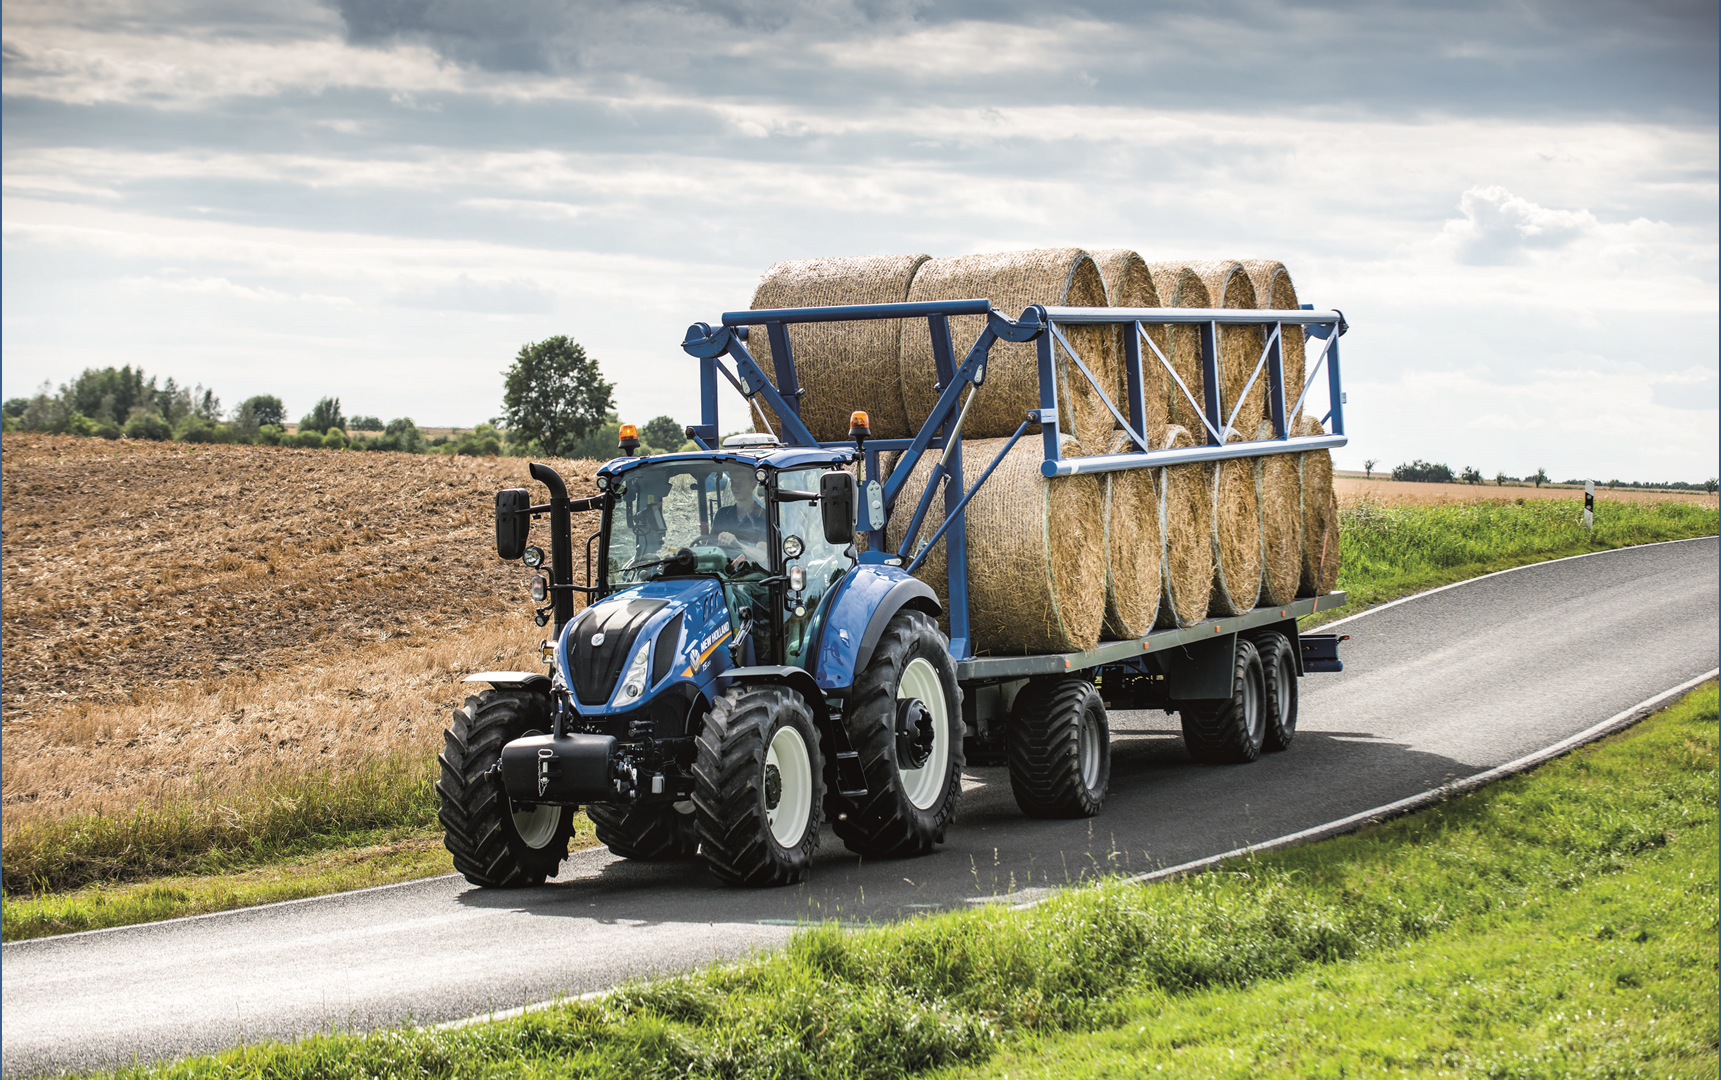 New Holland Agriculture T5.120 wins Best Utility title in the Tractor of the Year® 2017 awards